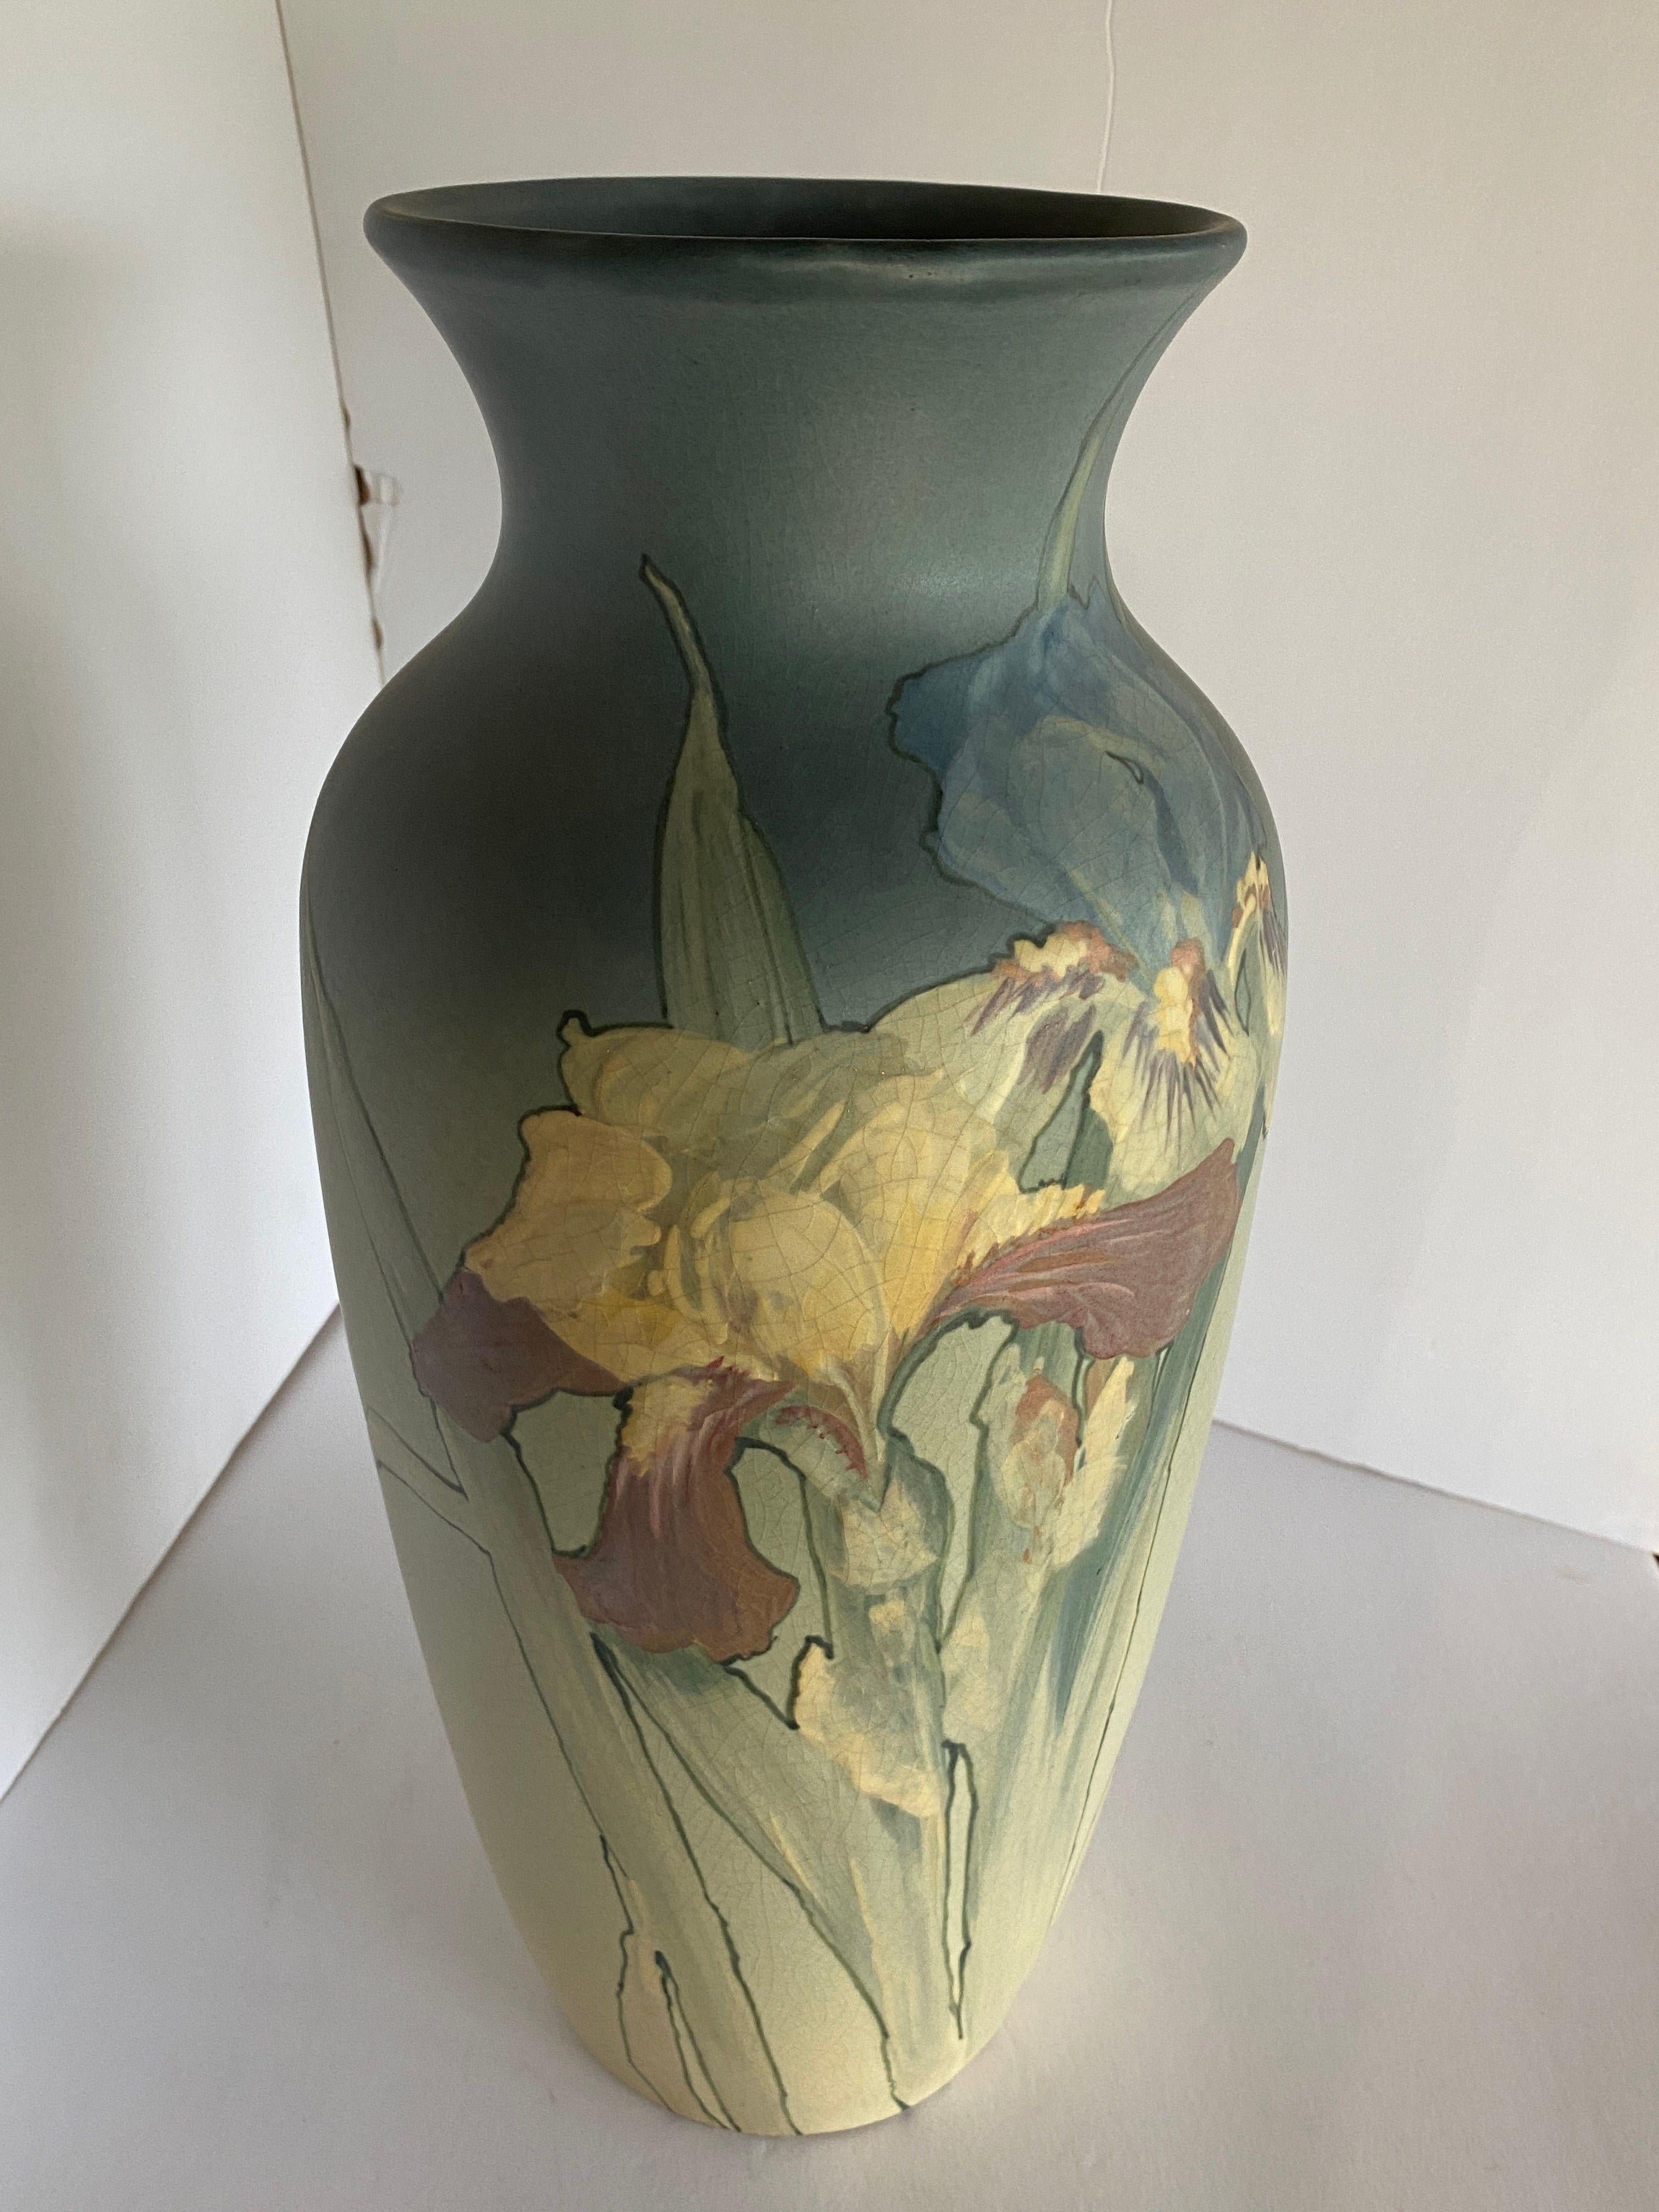 Early 20th Century Art Nouveau Hand-Painted Art Pottery Vase by Weller Pottery